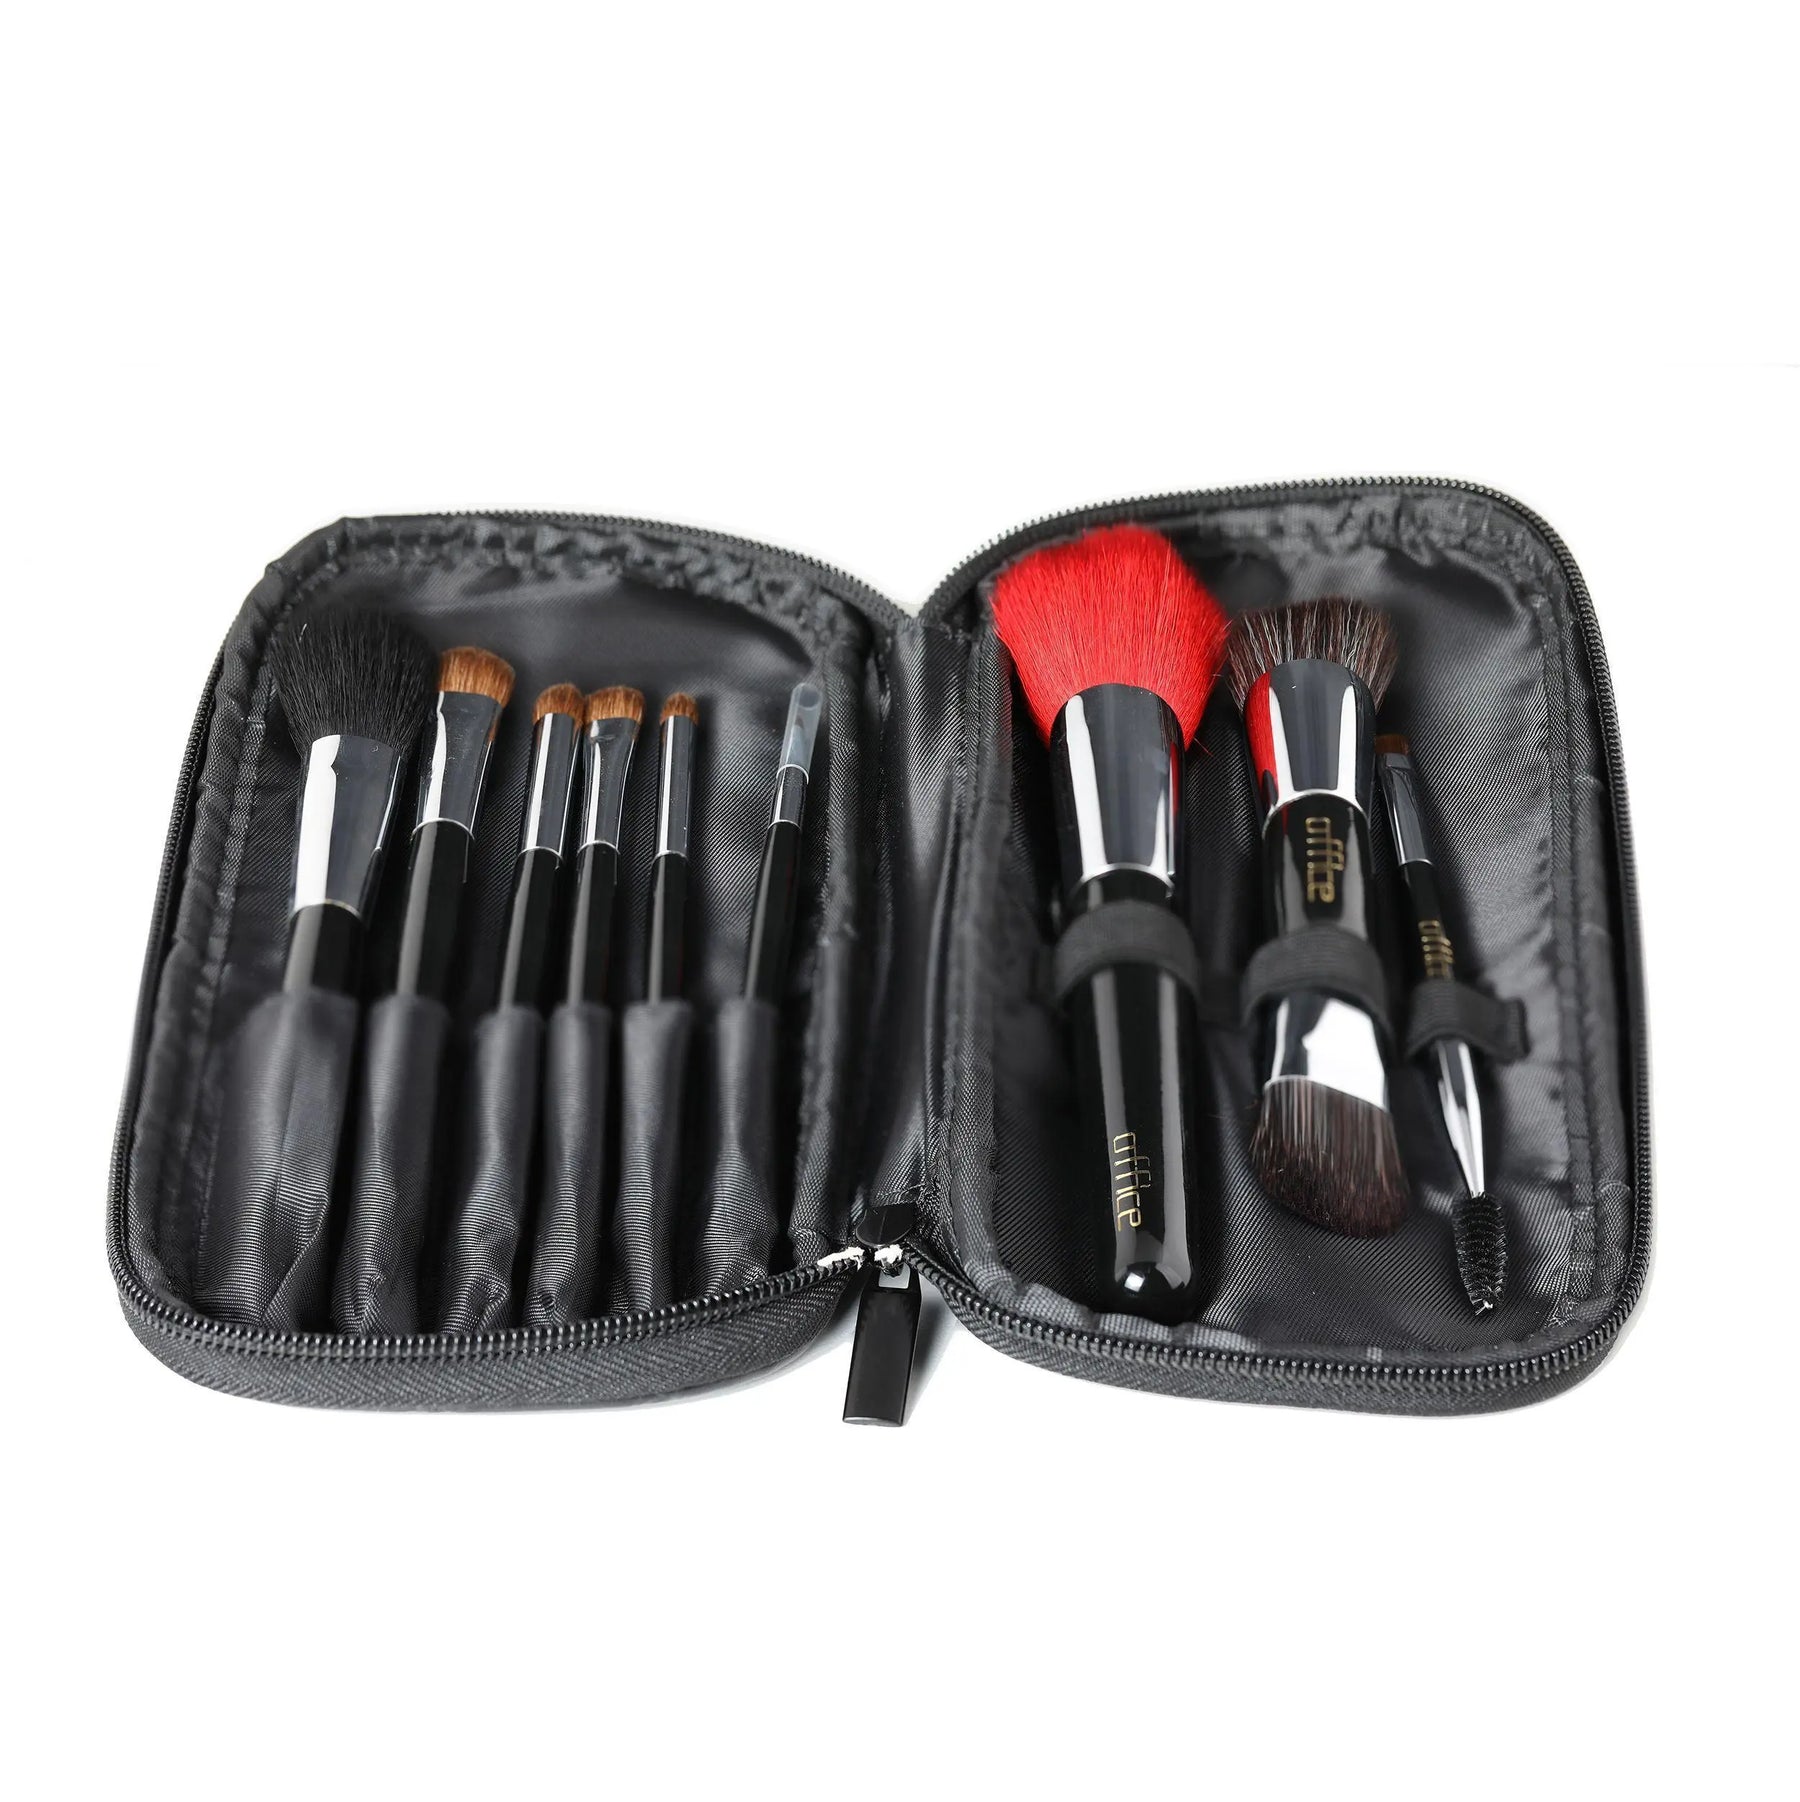 Office Makeup Set of brushes that will complete your makeup set